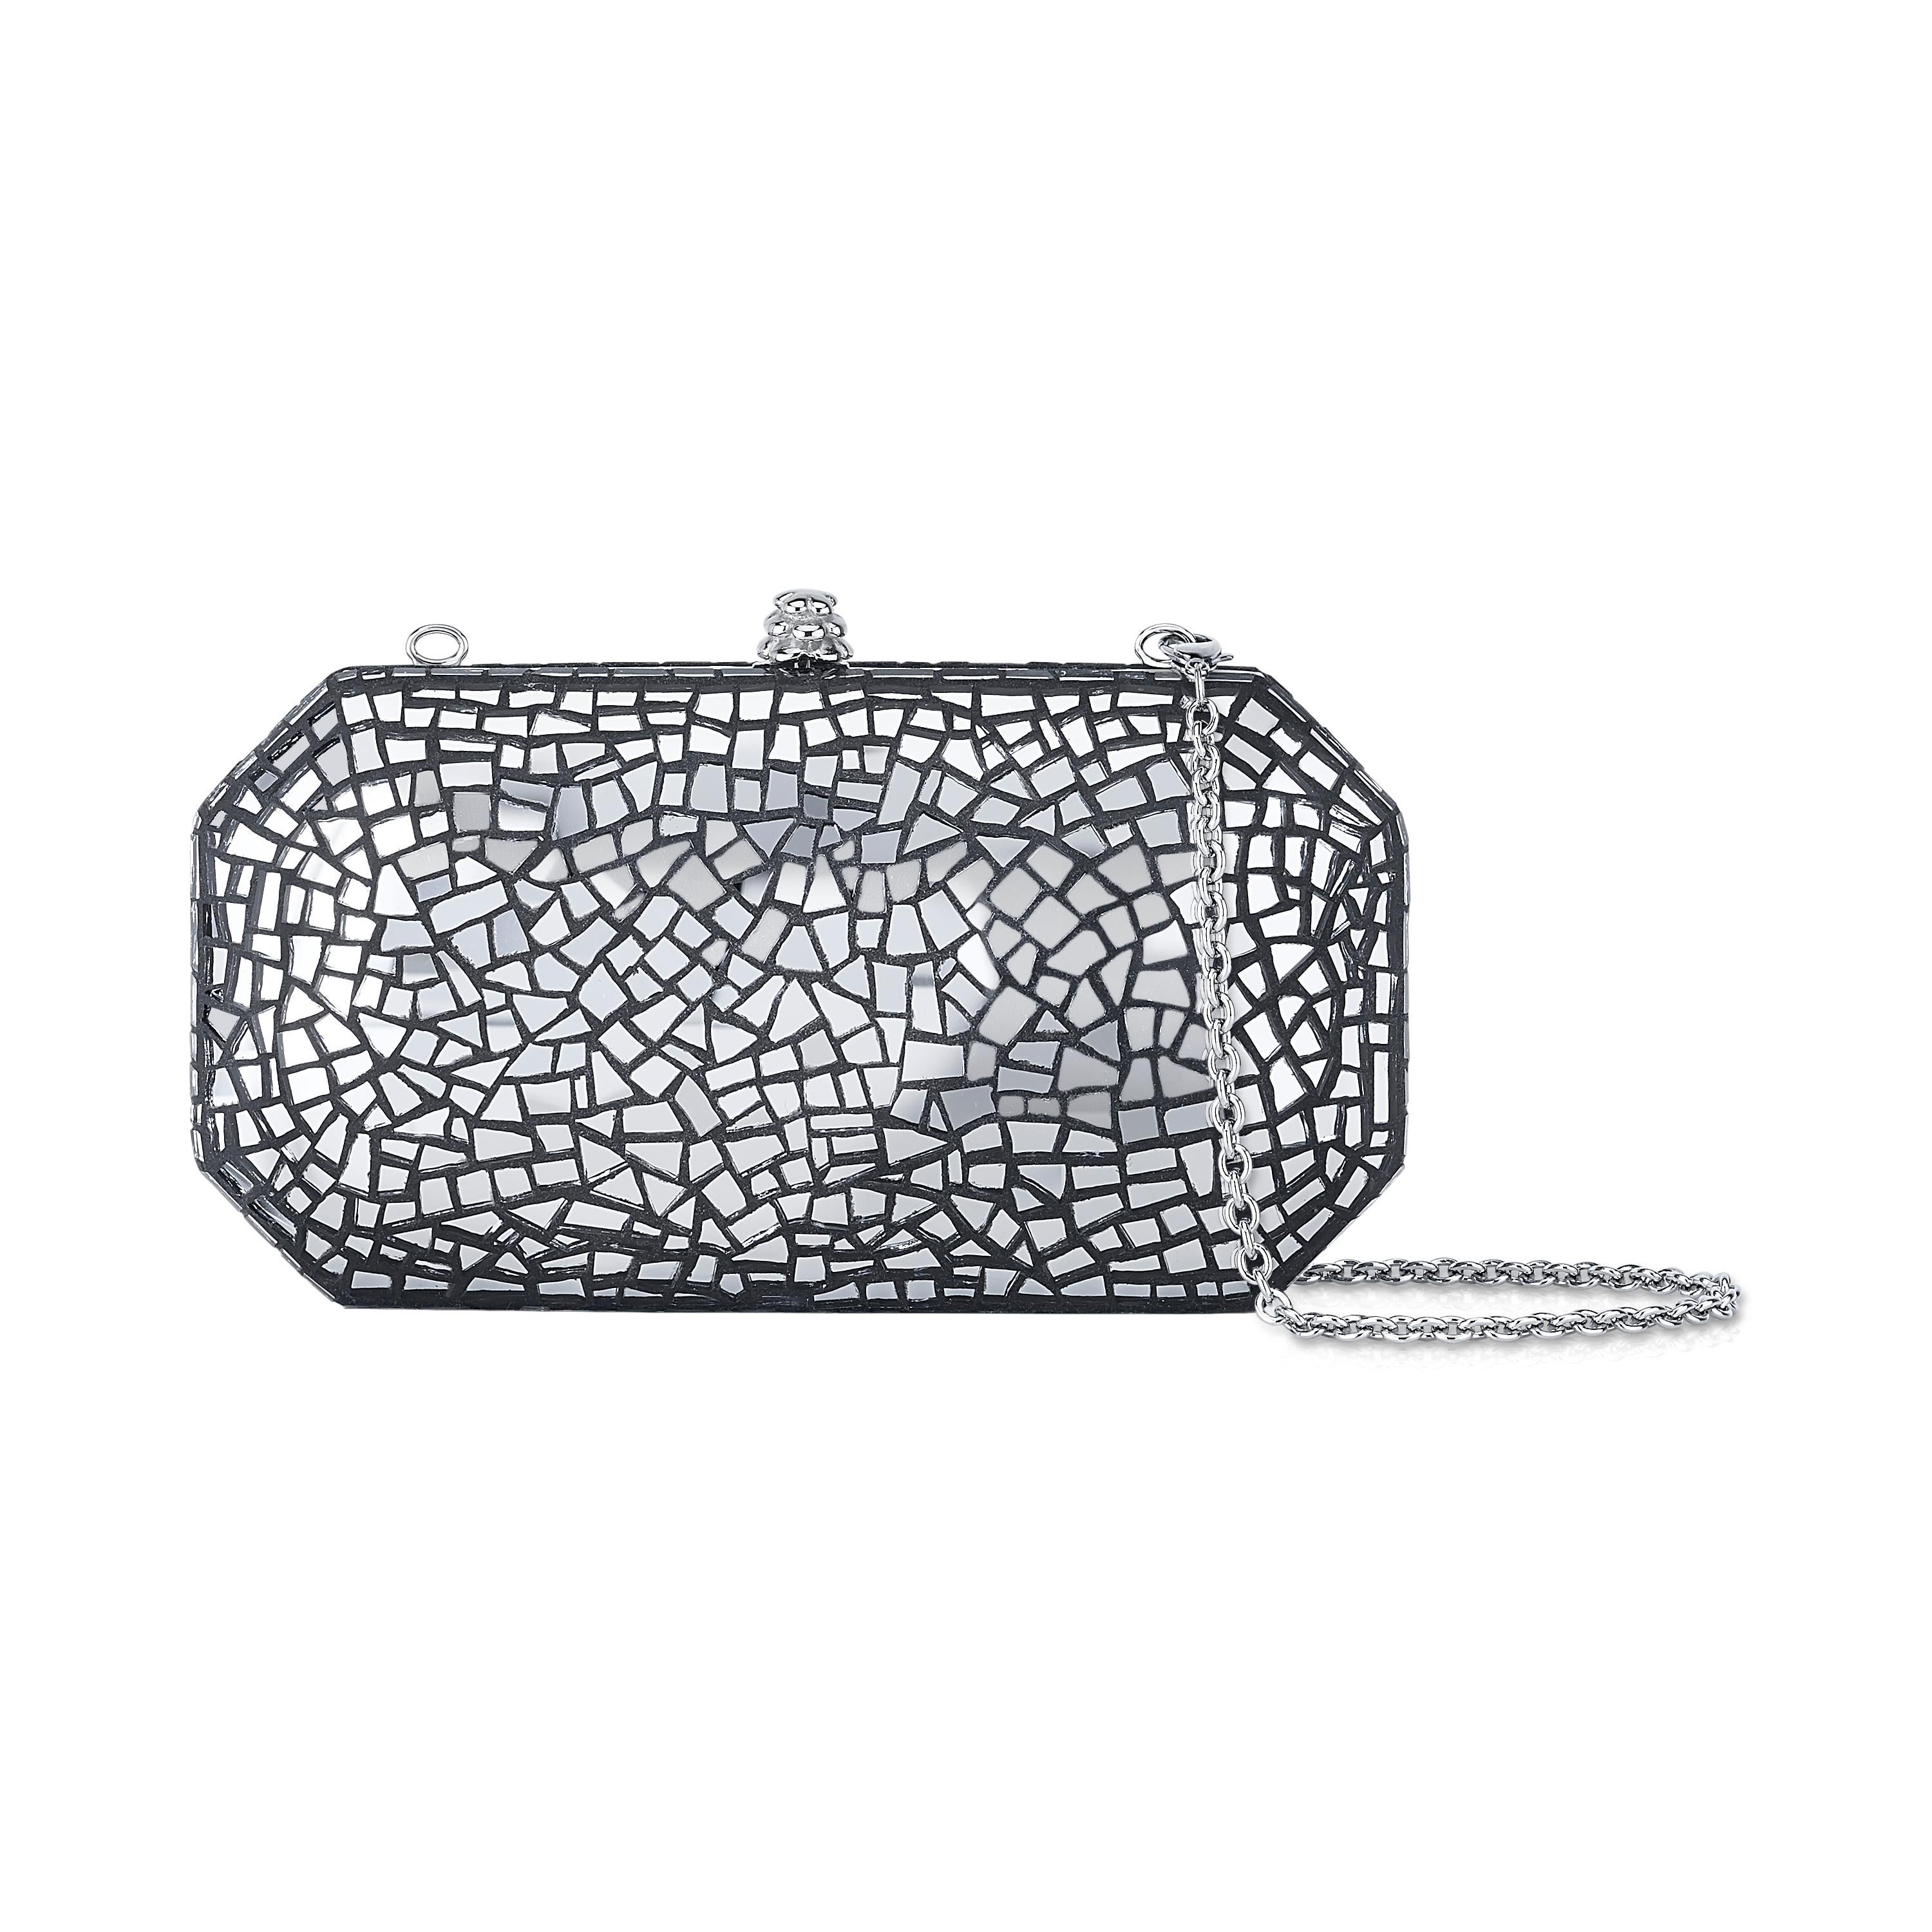 The Perry in Emperor's Jewel Mosaic Tile is a hard-framed clutch designed with interior pockets and an optional silver cross-body chain. Its elegant emerald shape is inspired by Tyler’s own engagement ring and named after her father, Perry Ellis. It